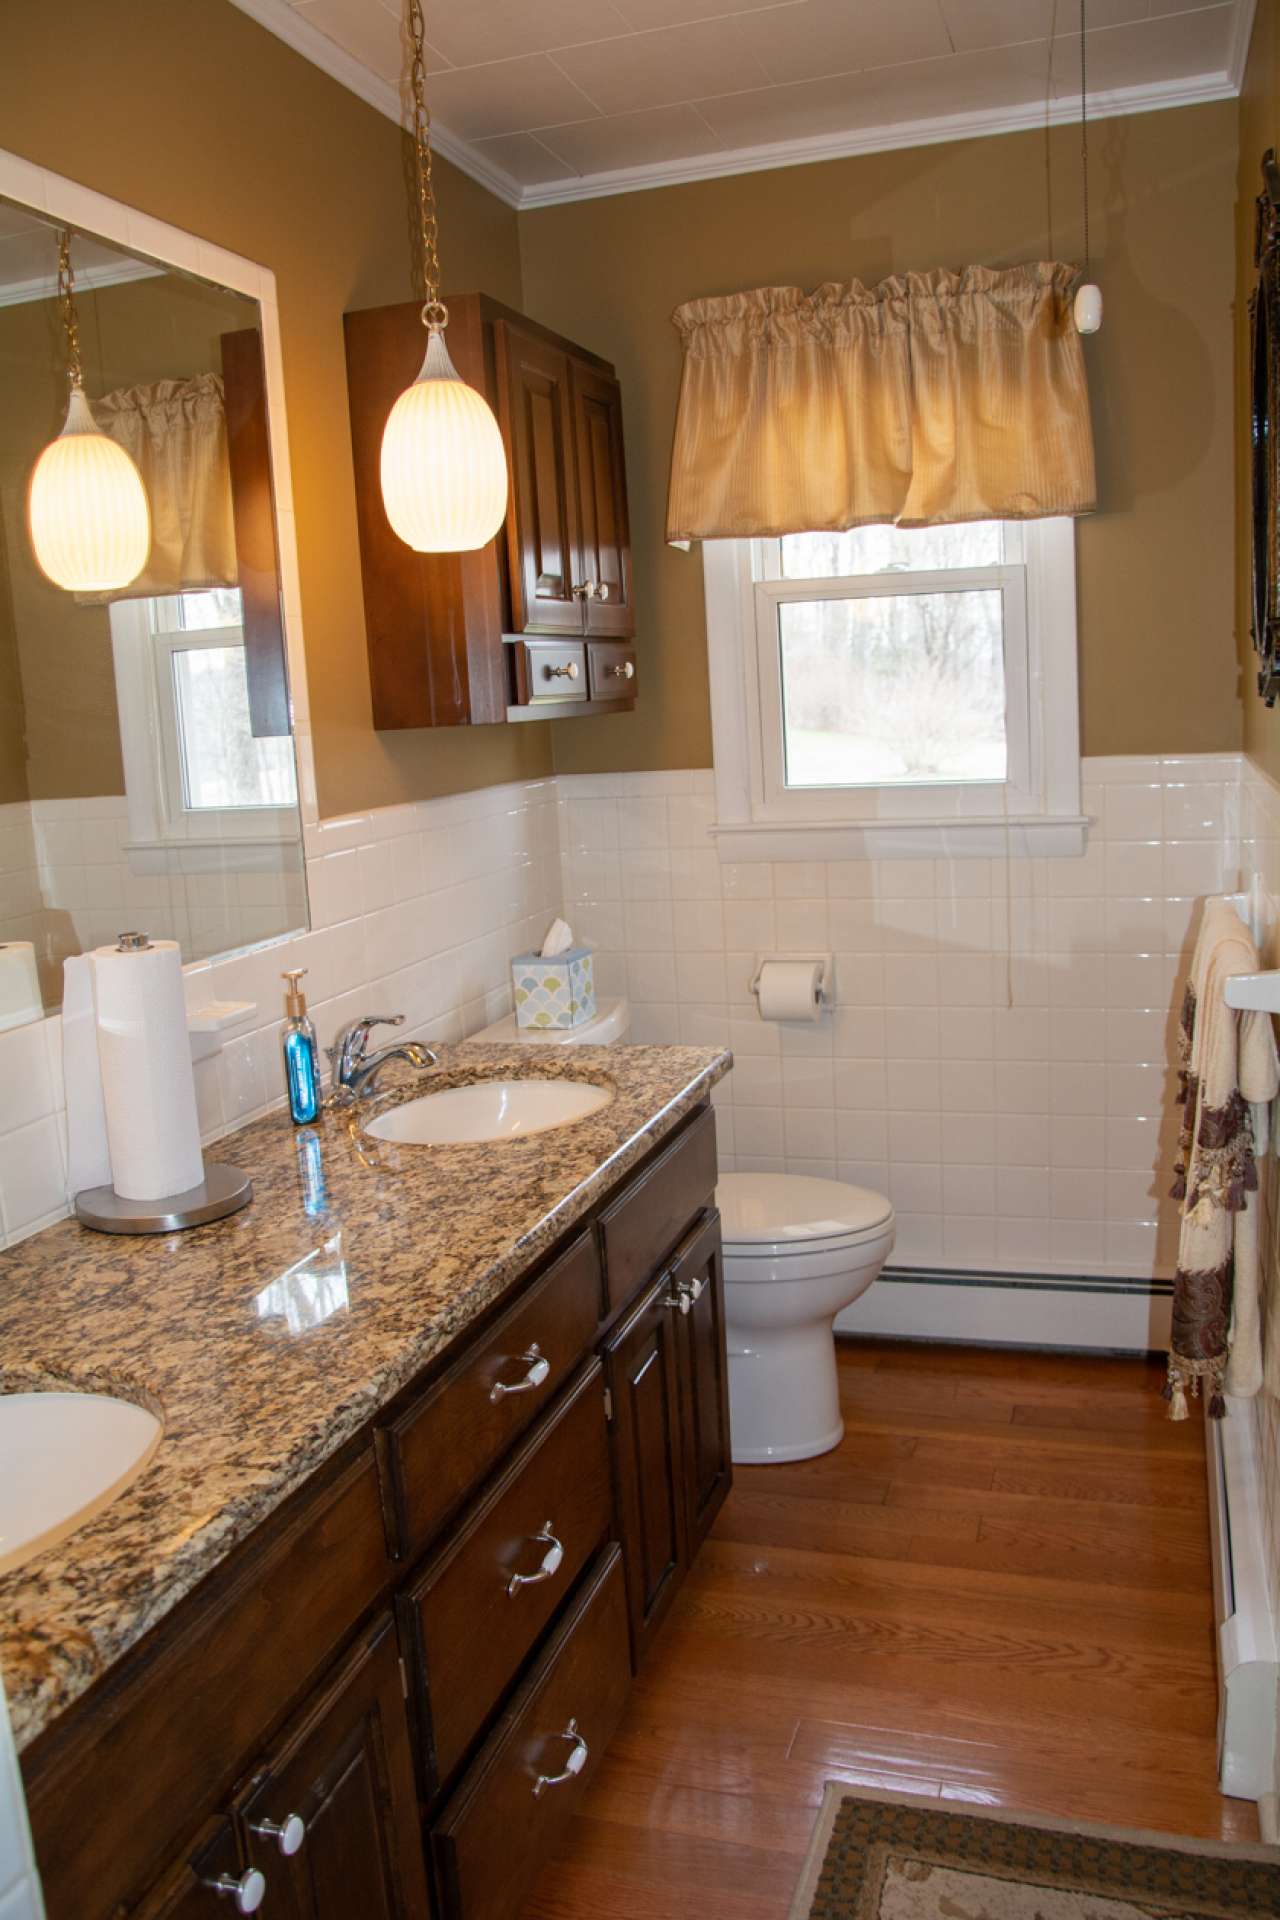 Full bath features granite counter top with double vanity and tile shower with bench seat.